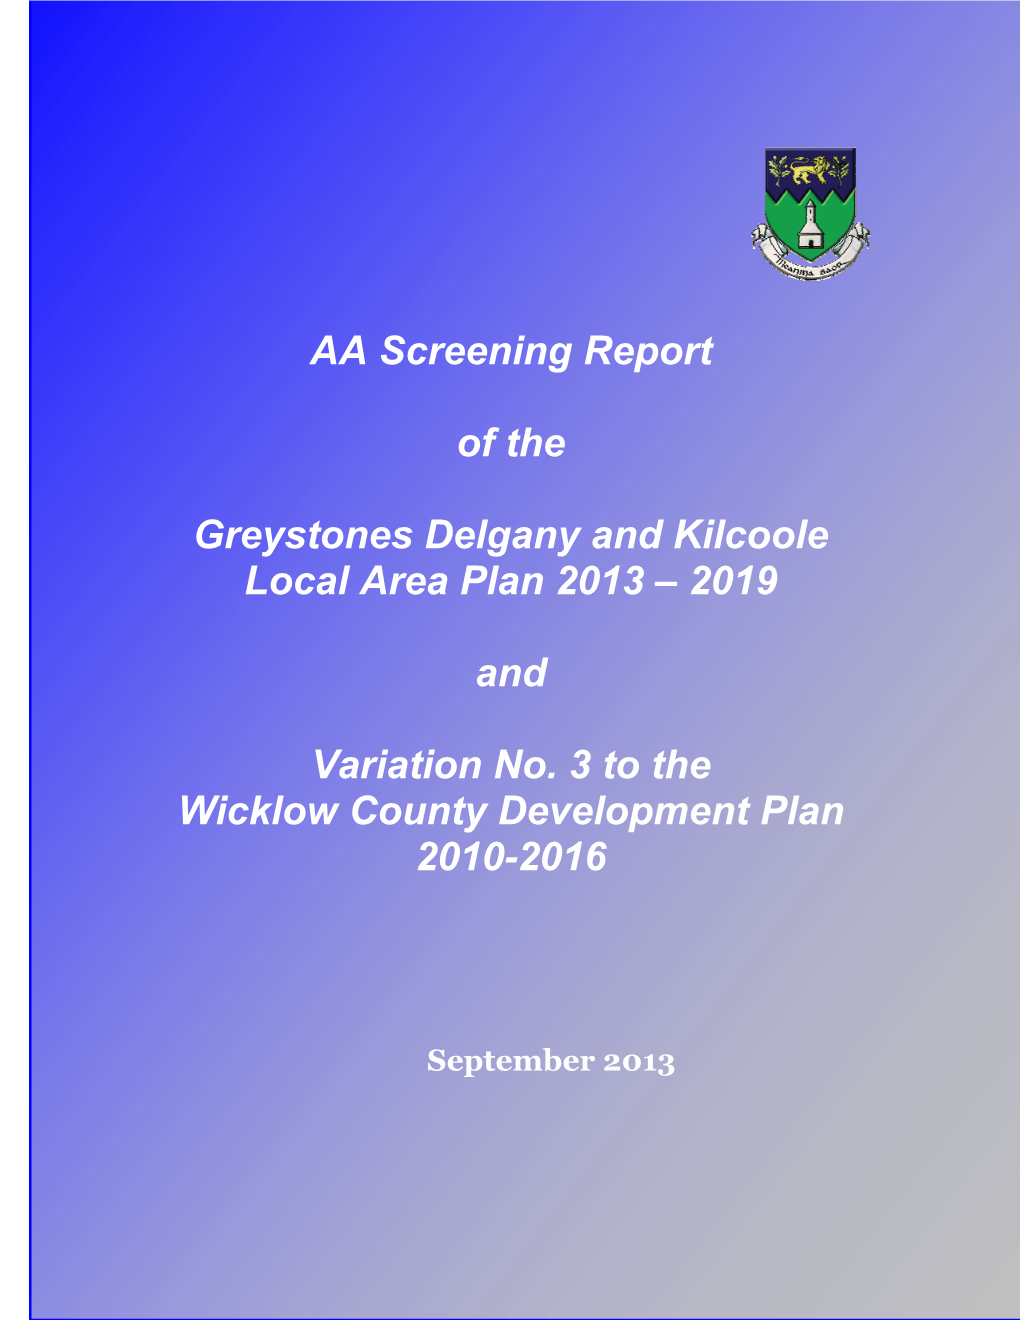 AA Screening Report of the Greystones Delgany and Kilcoole Local Area Plan 2013